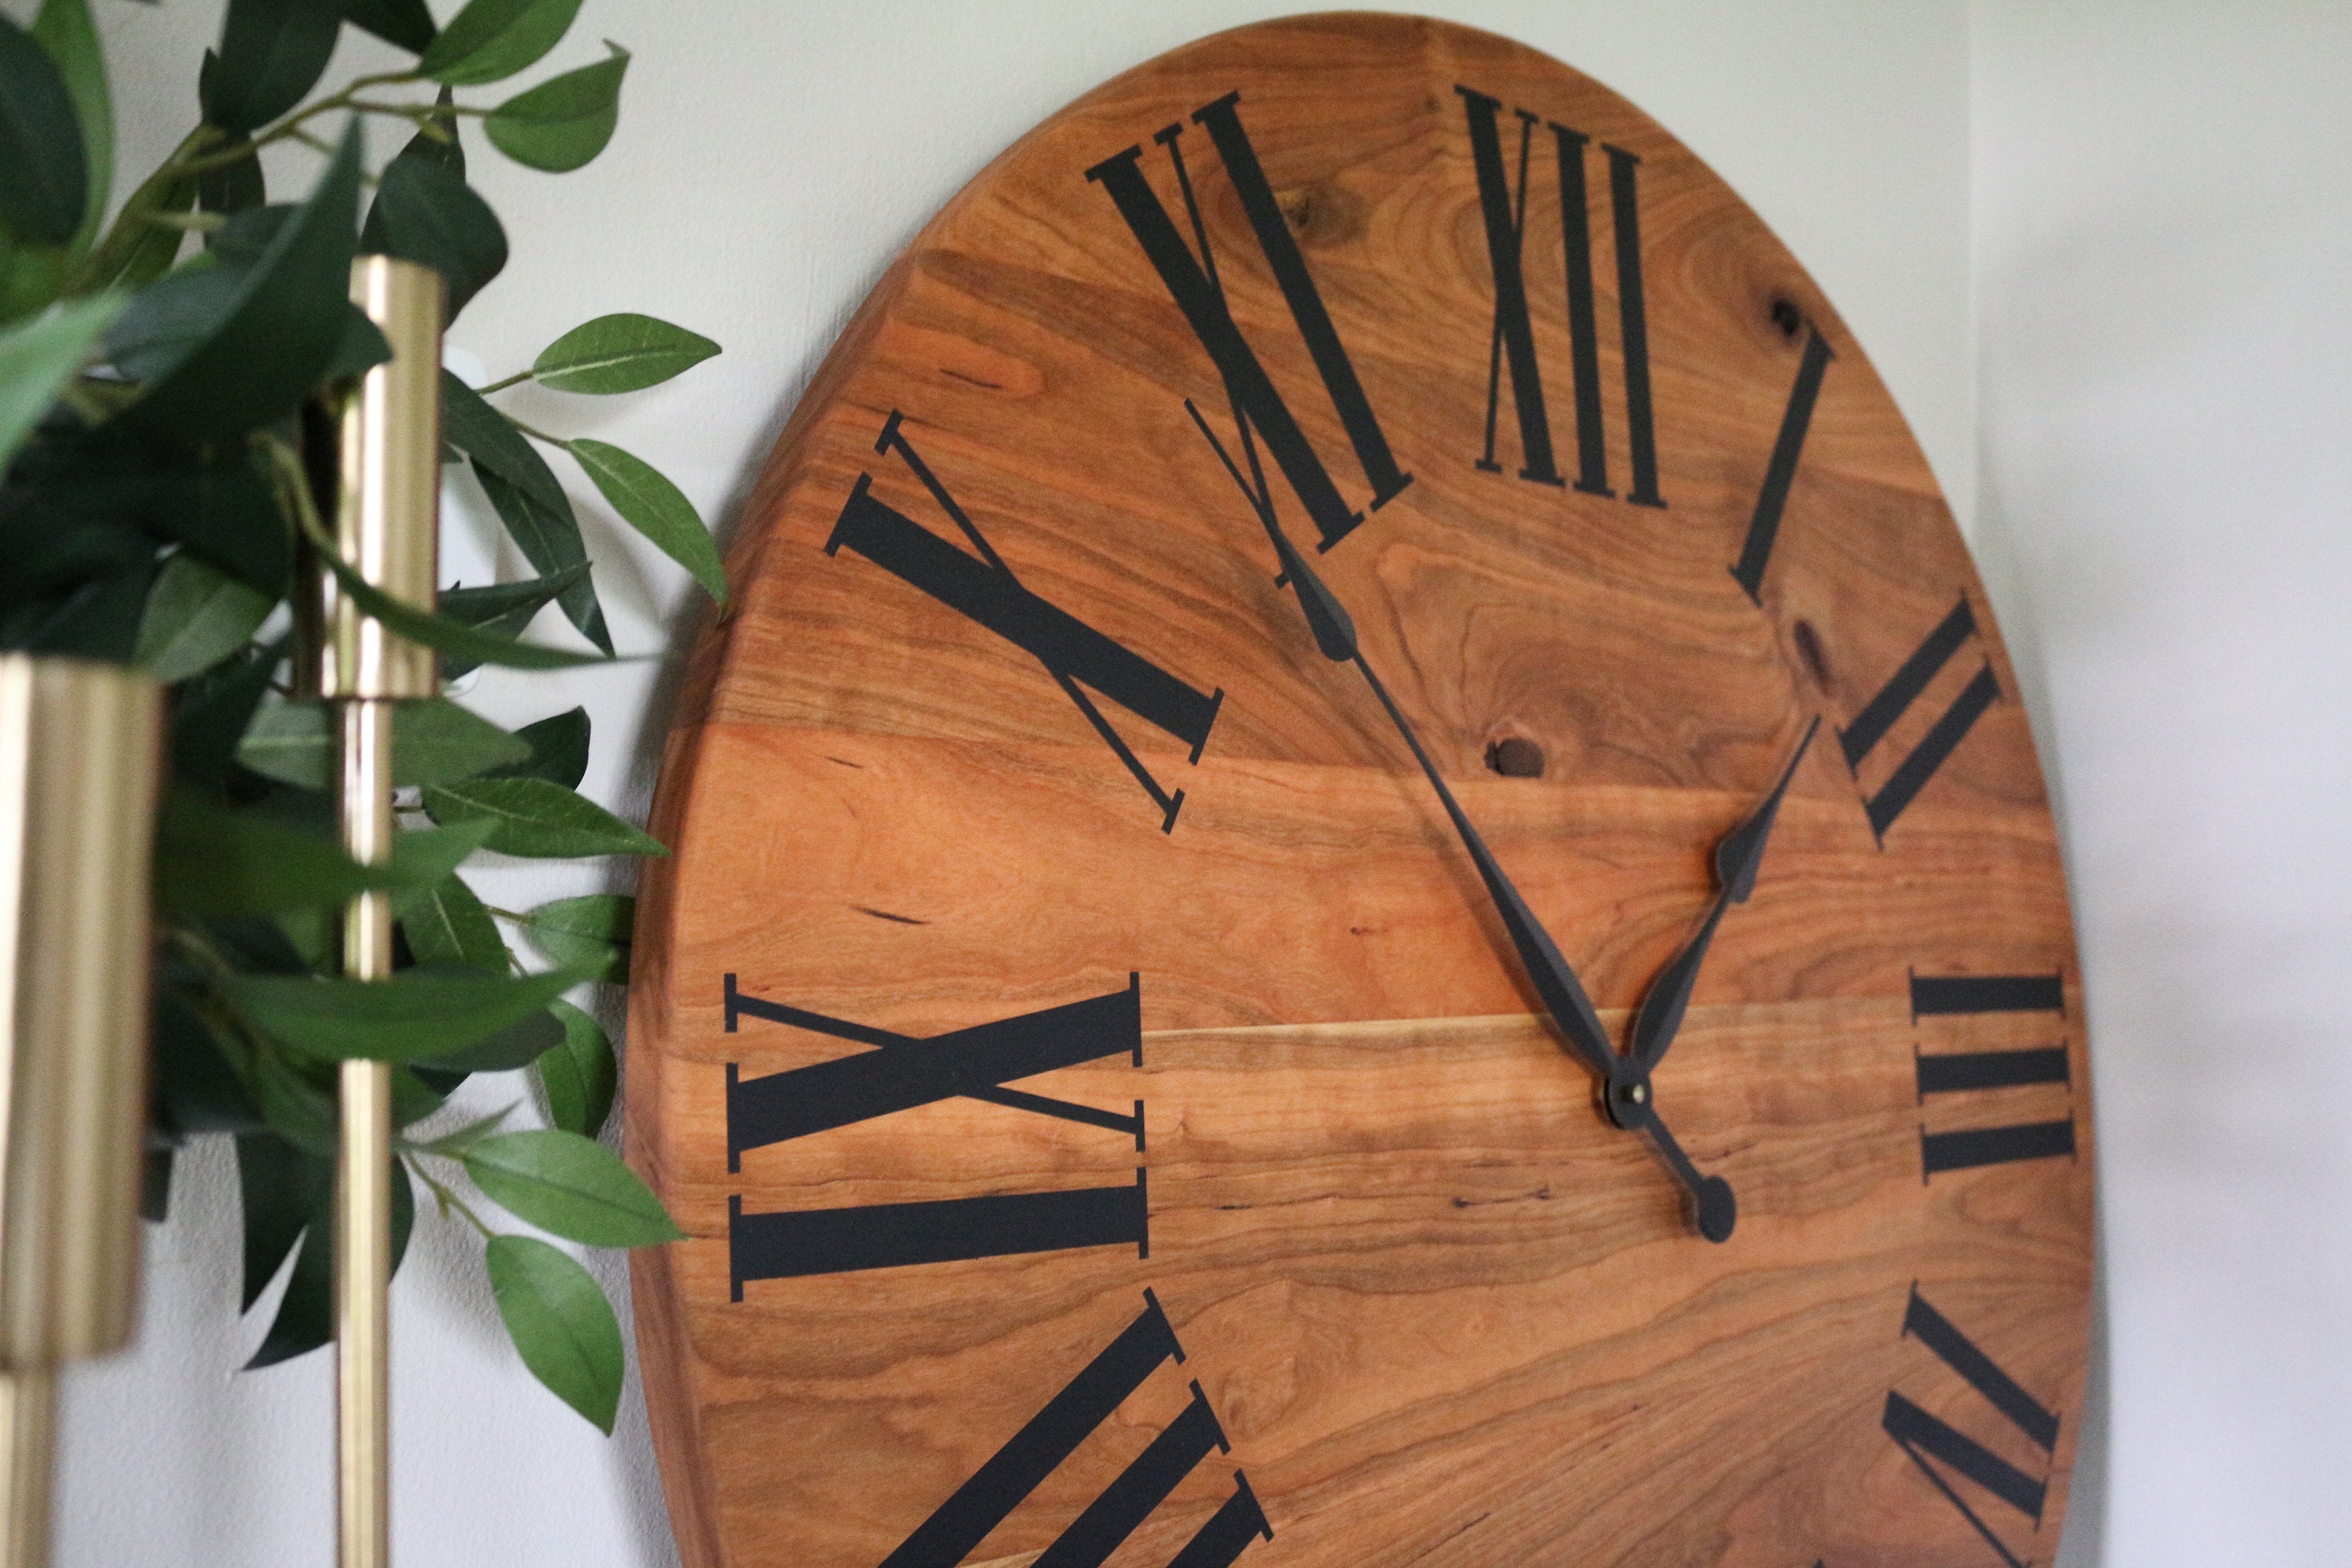 Large Solid Cherry Hardwood Wall Clock with Black Roman Numerals